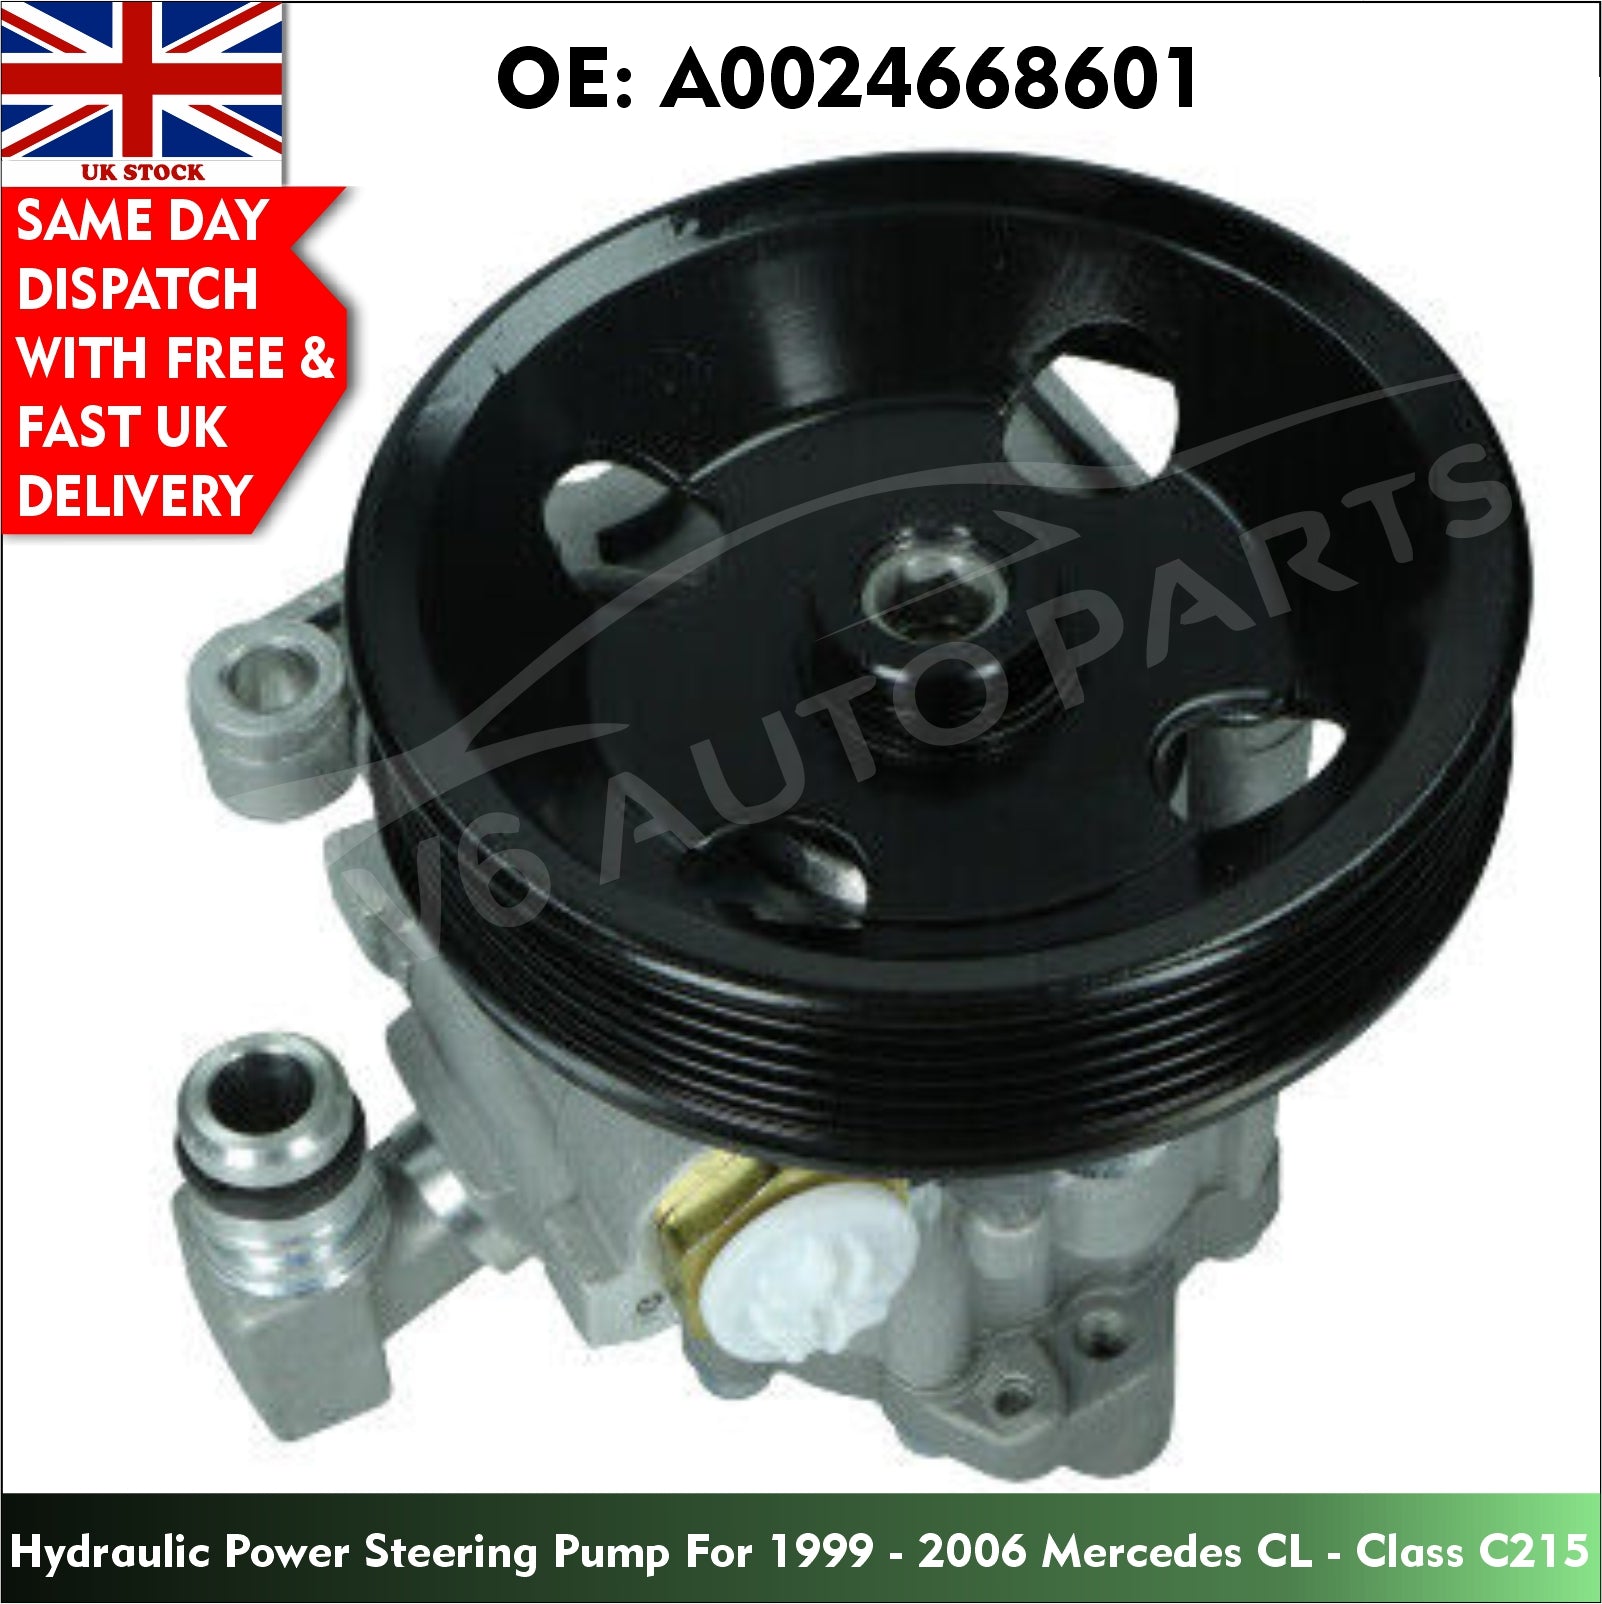 Power Steering Hydraulic Pump For Mercedes 2004 - 2010 CLS- Class C219 500 300